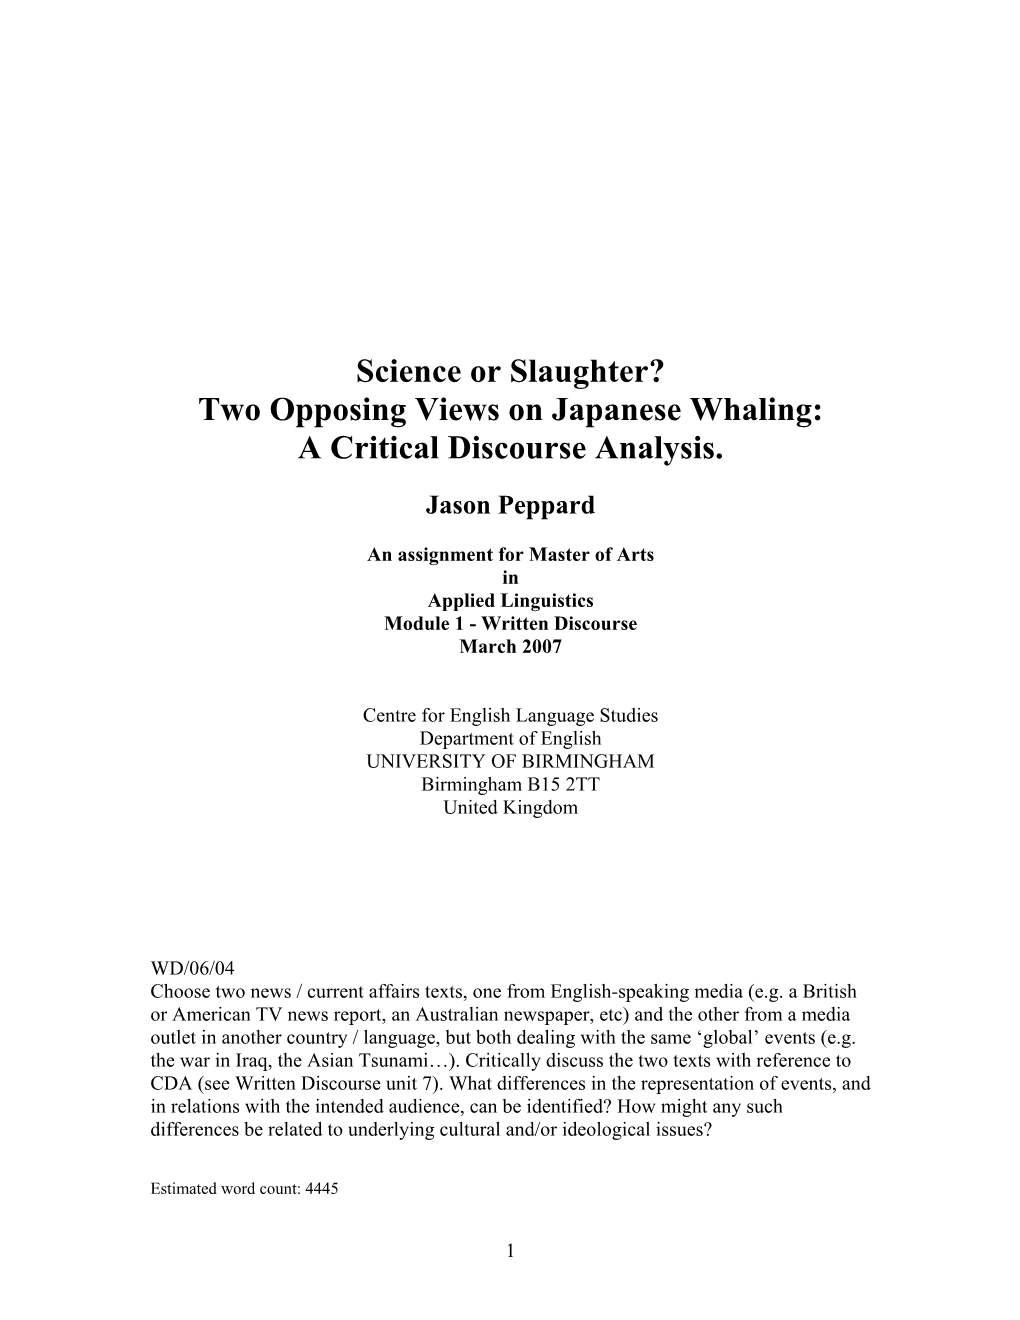 Science Or Slaughter? Two Opposing Views on Japanese Whaling: a Critical Discourse Analysis